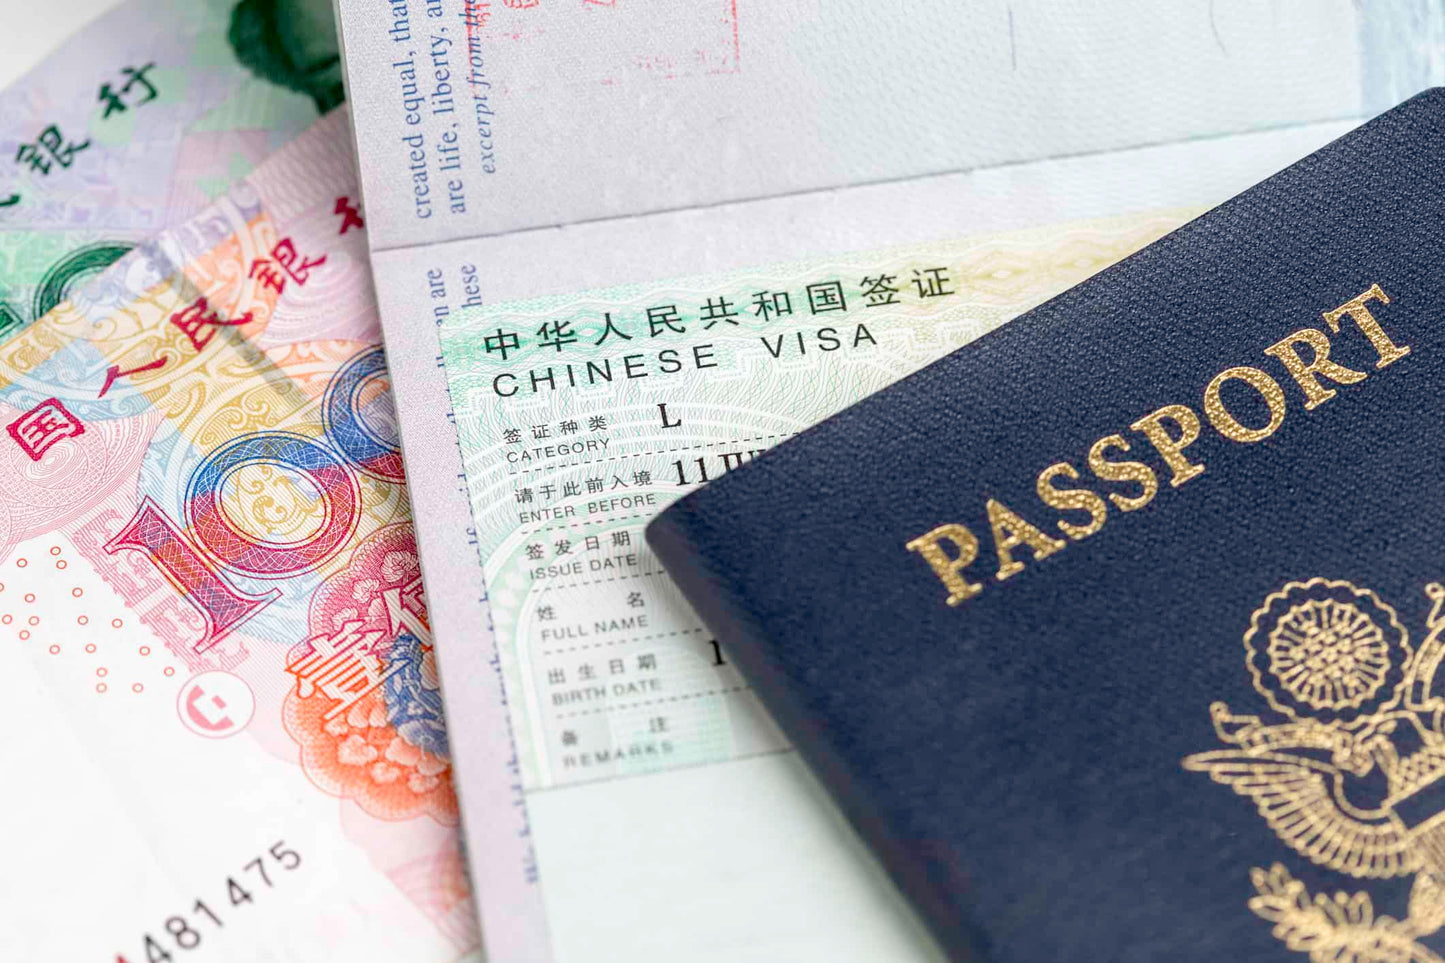 China L Tourism Visa All Fees Are Included (NY Consular District)